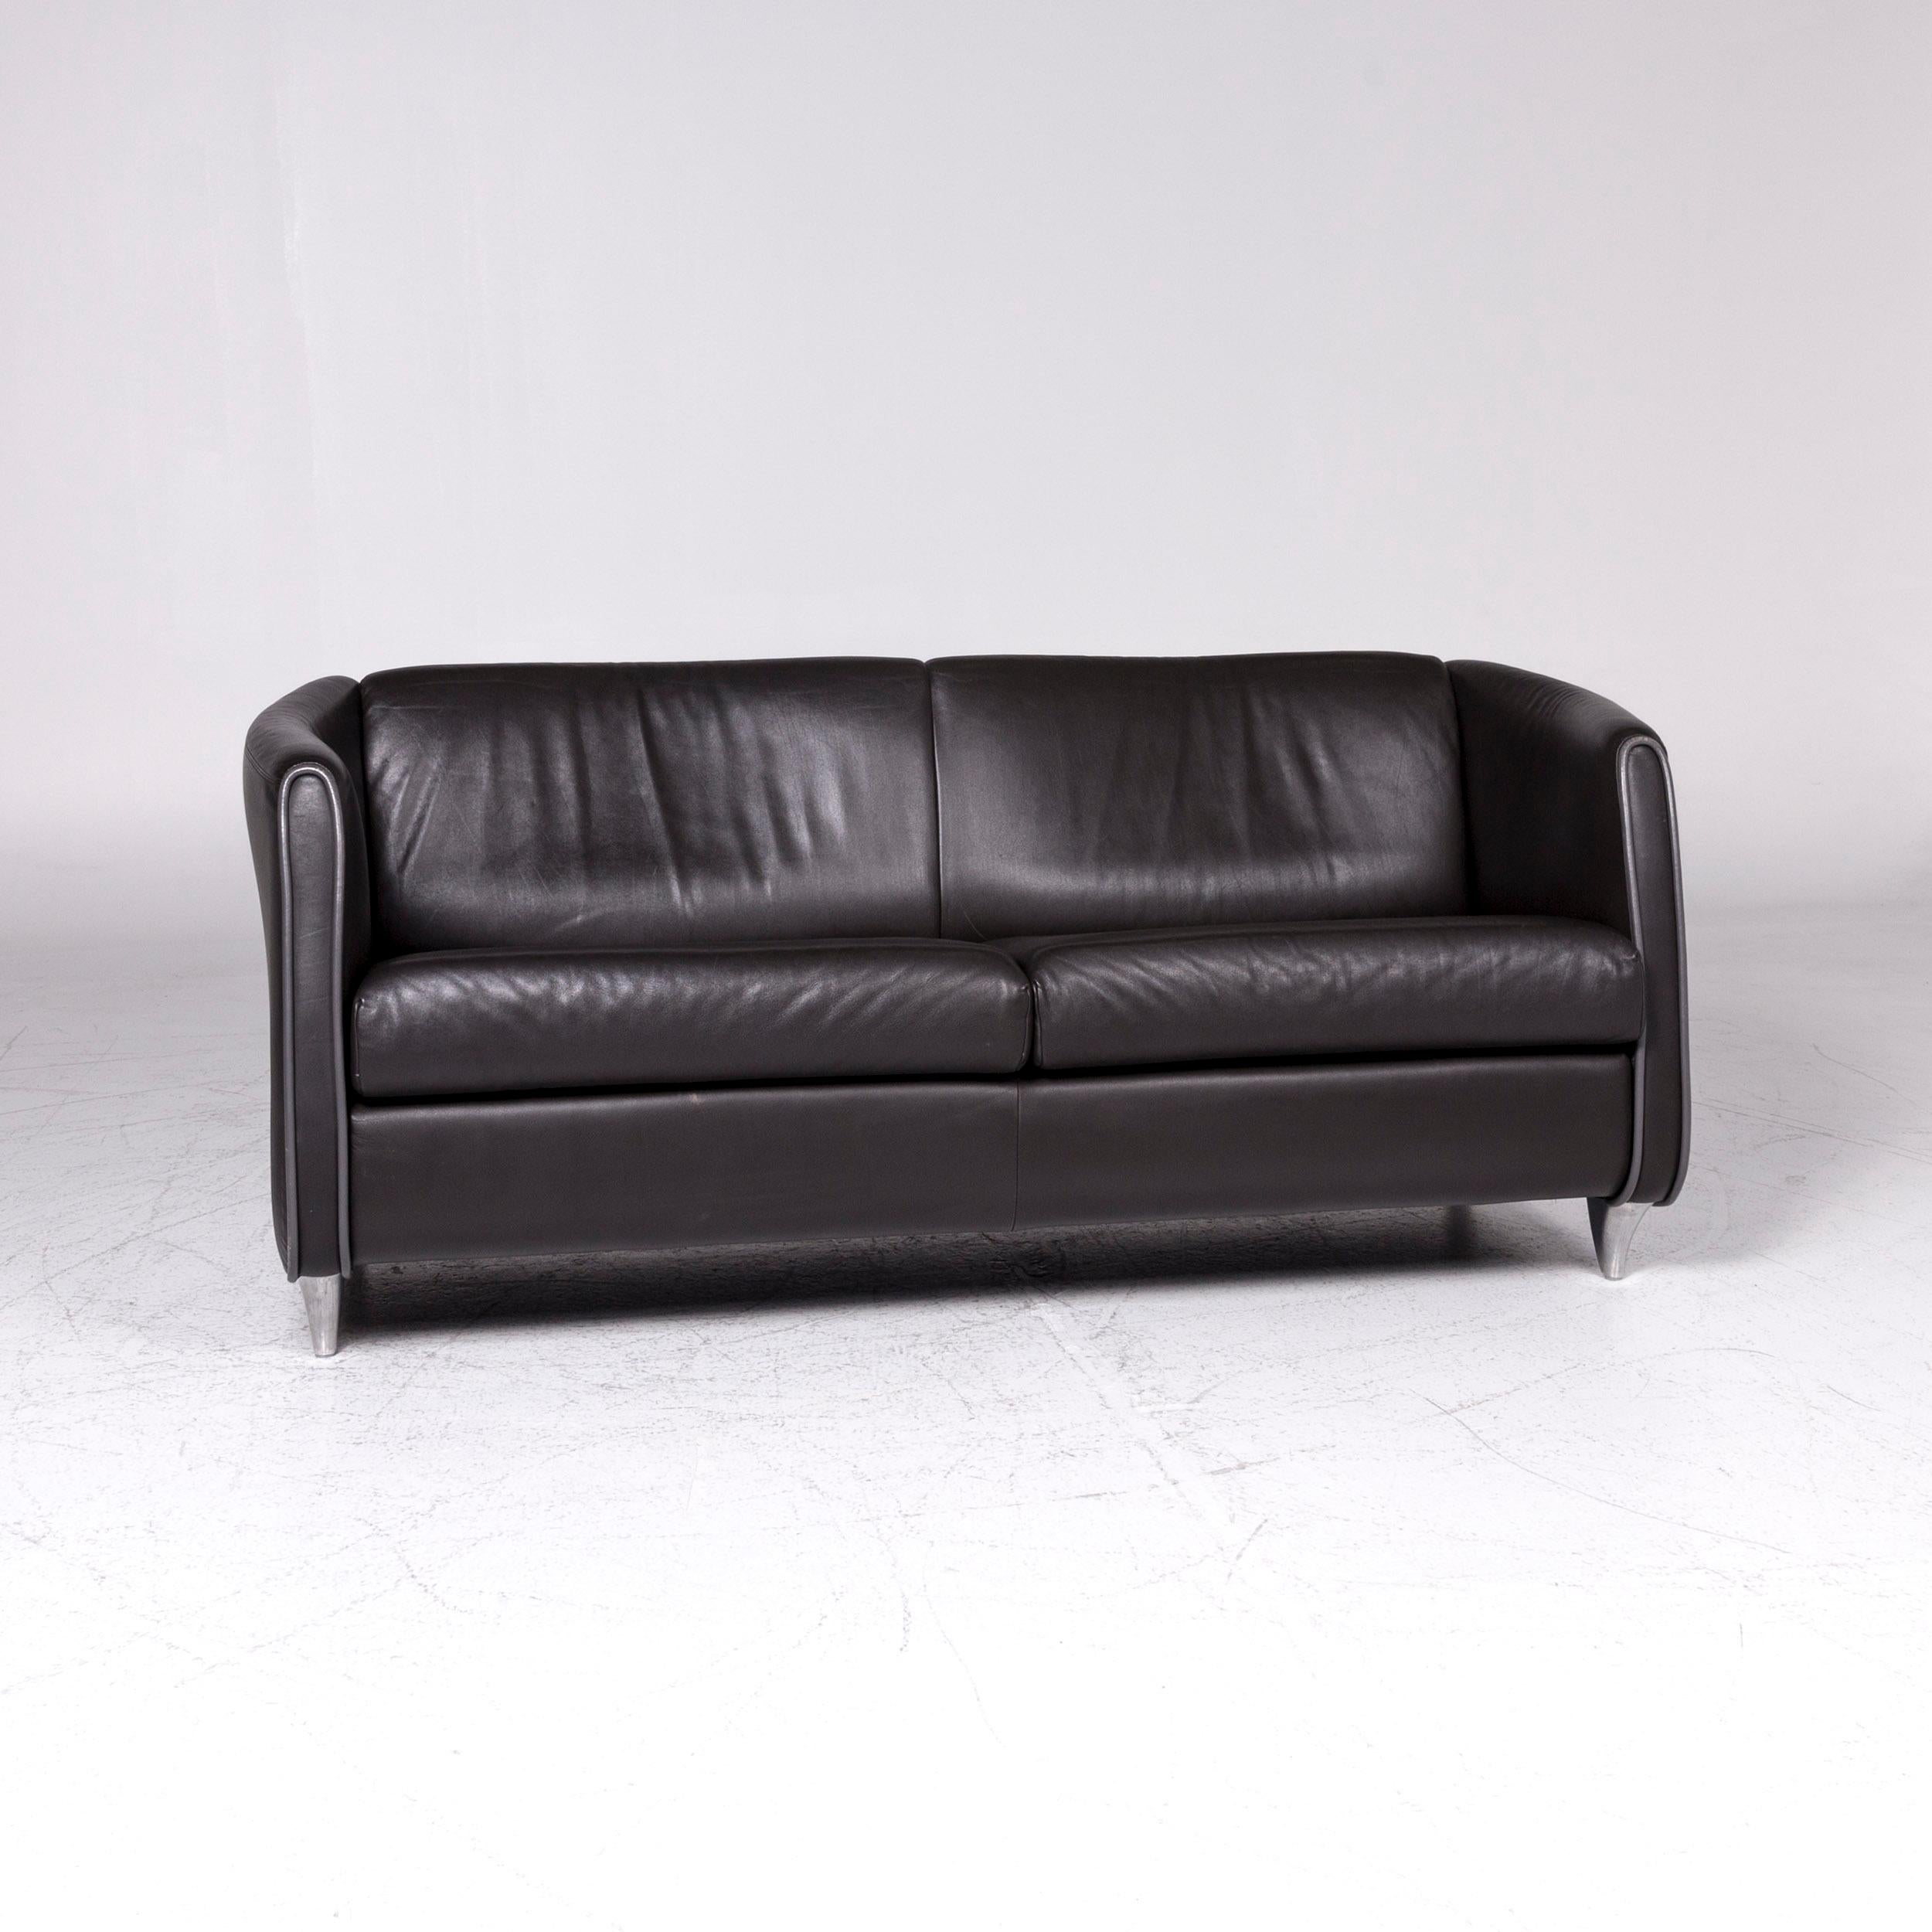 Swiss De Sede Designer Leather Sofa Black Two-Seat Couch For Sale